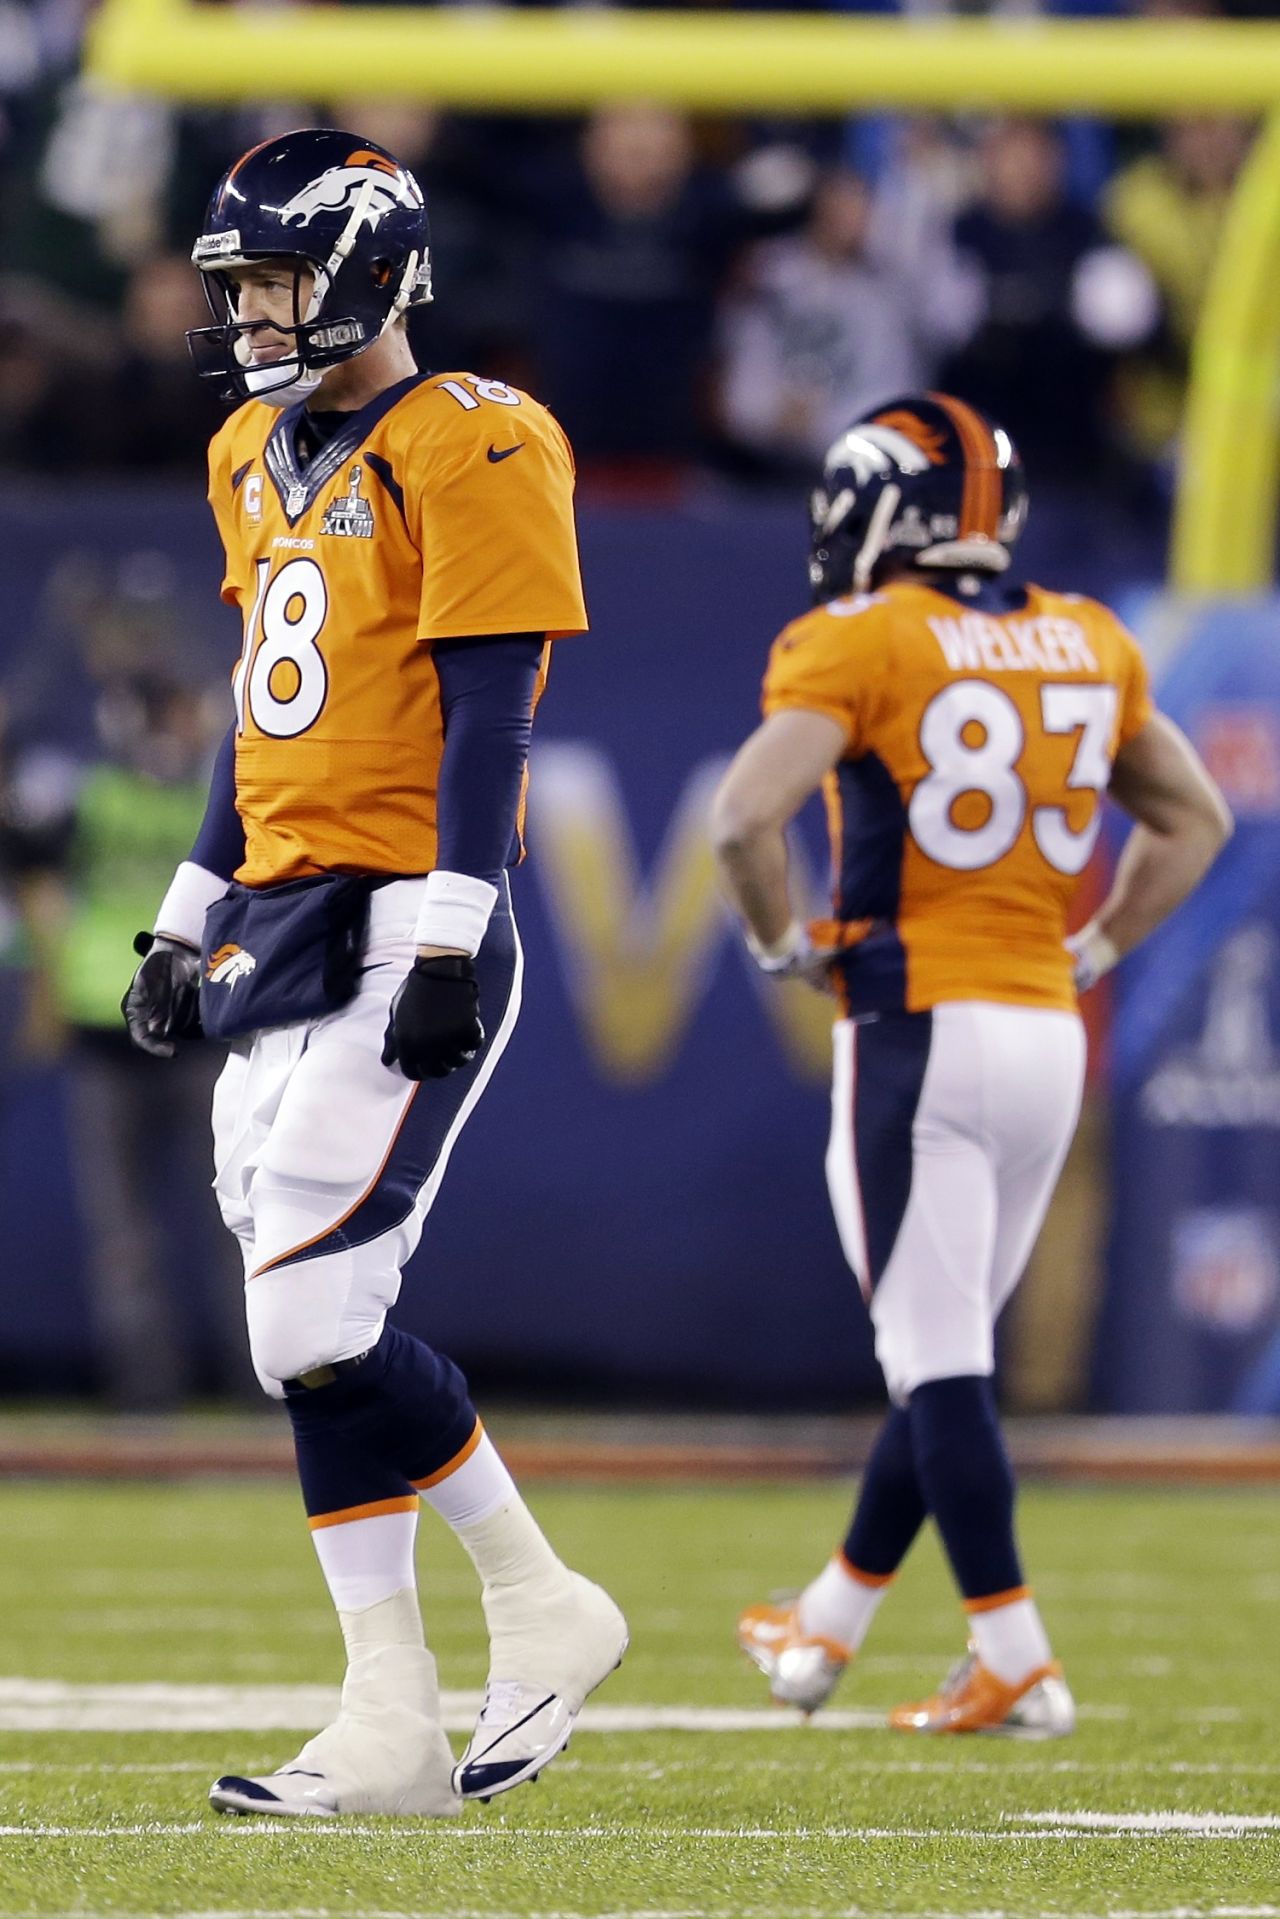 Manning (18) cuts a dejected figure after he walks off the field after being intercepted.